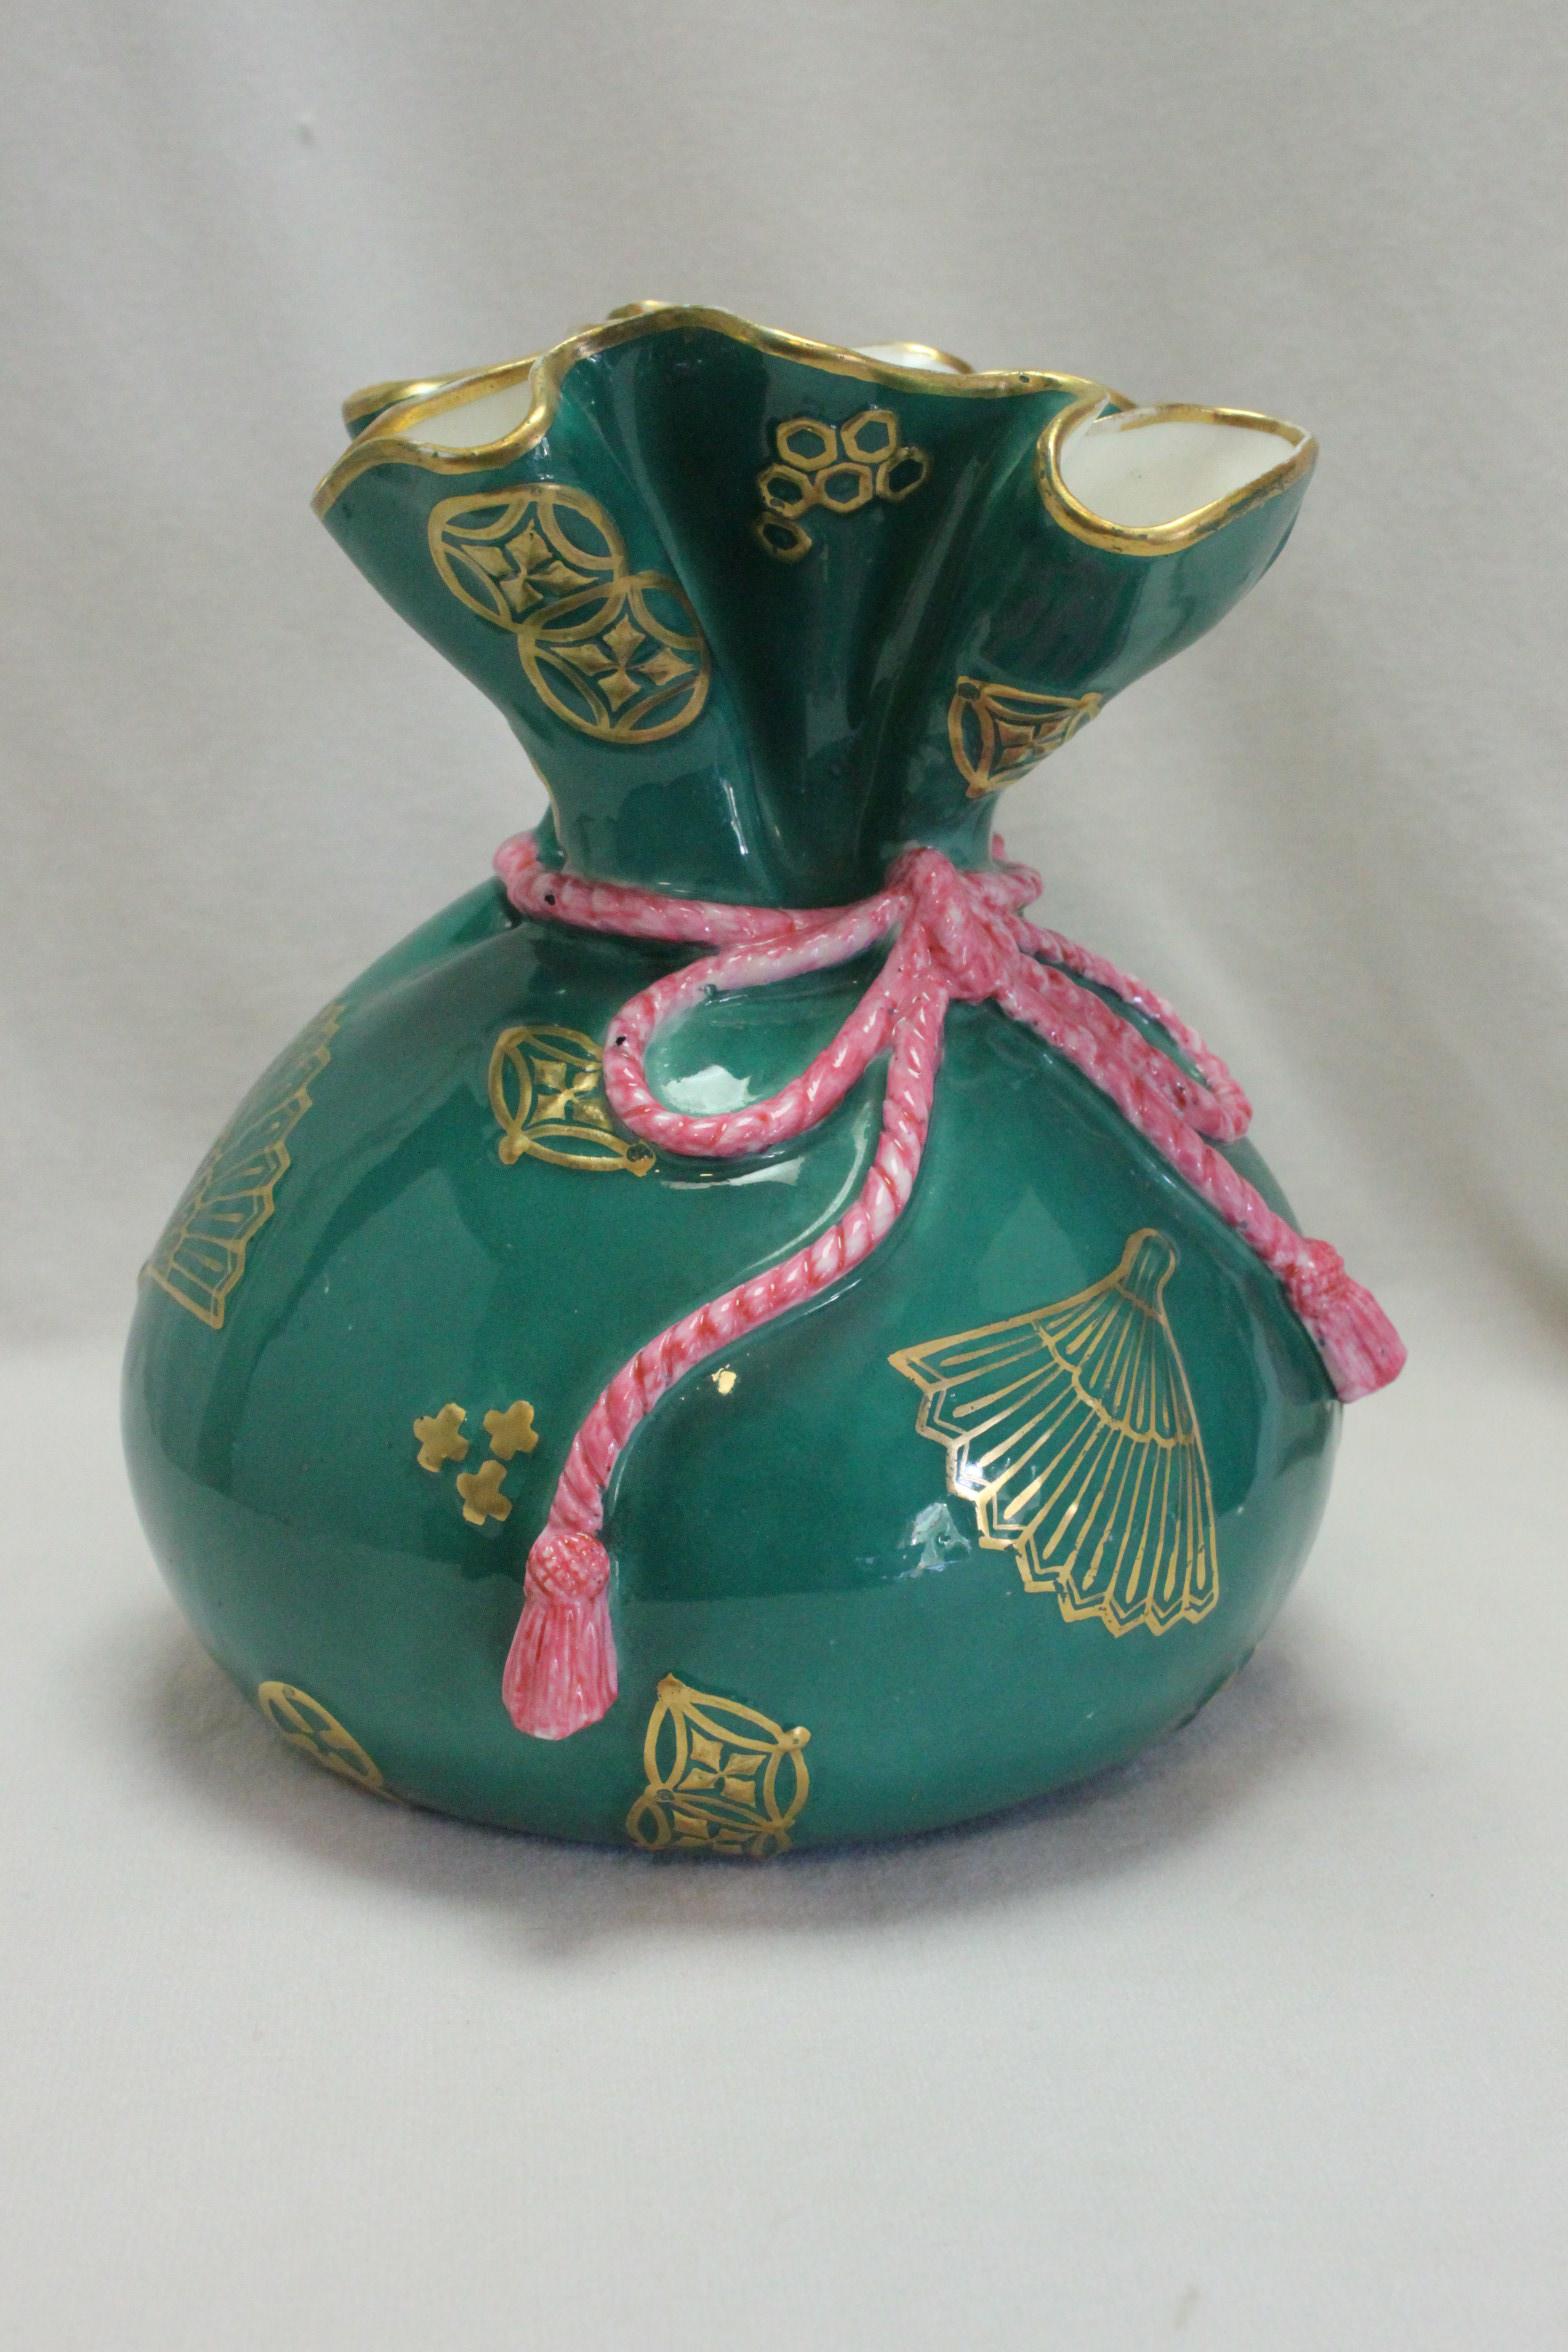 This Royal Worcester vase is a bit unusual in that it is in the shape of a Japanese drawstring purse-it is possibly shape 381 which was issued in 1874 and described as 